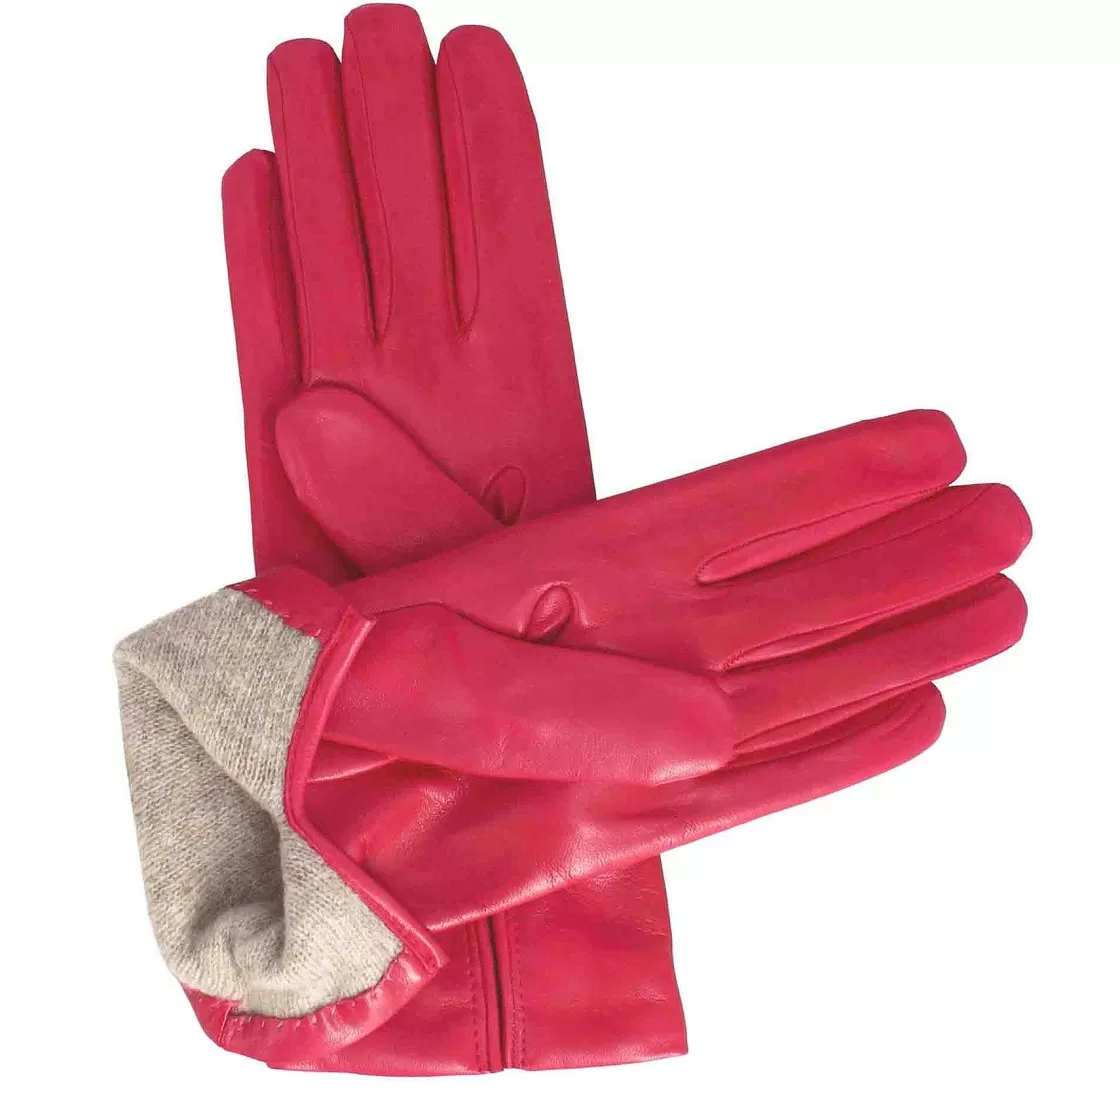 Leonardo Women'S Glove In Smooth Fuchsia Leather With Cashmere Lining Best